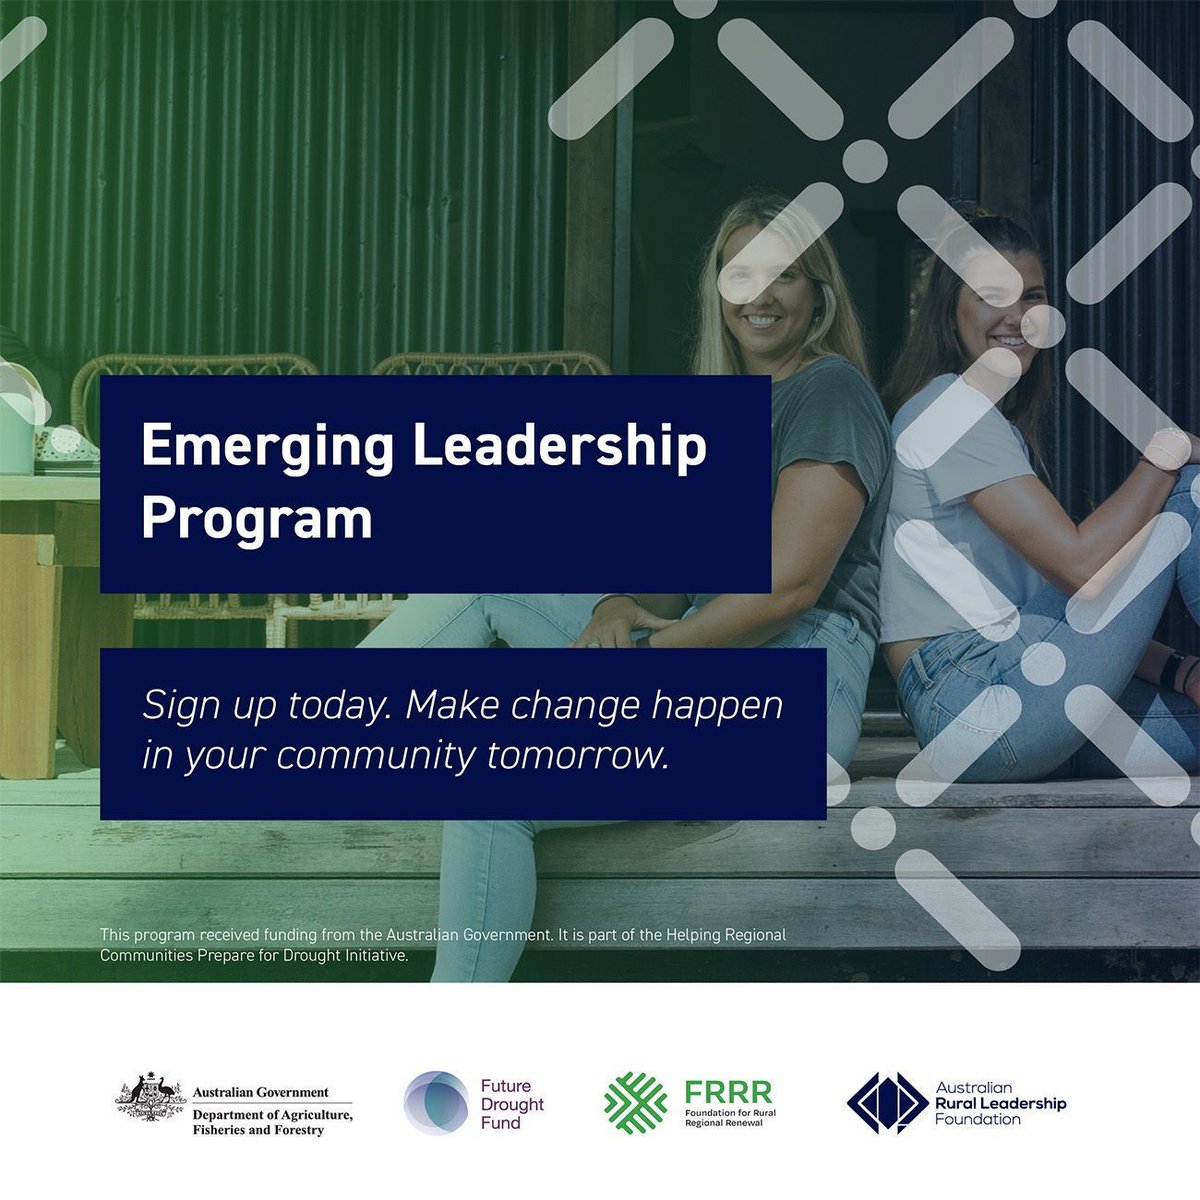 The Emerging Leadership Program hosted by the @ARLFNews aims to develop self-awareness, resilience, and effective leadership skills in agricultural communities facing drought and climate issues. Read more and apply: buff.ly/4bhftDP @VicHub_Drought @FRRR_Oz #AusAg #FDF